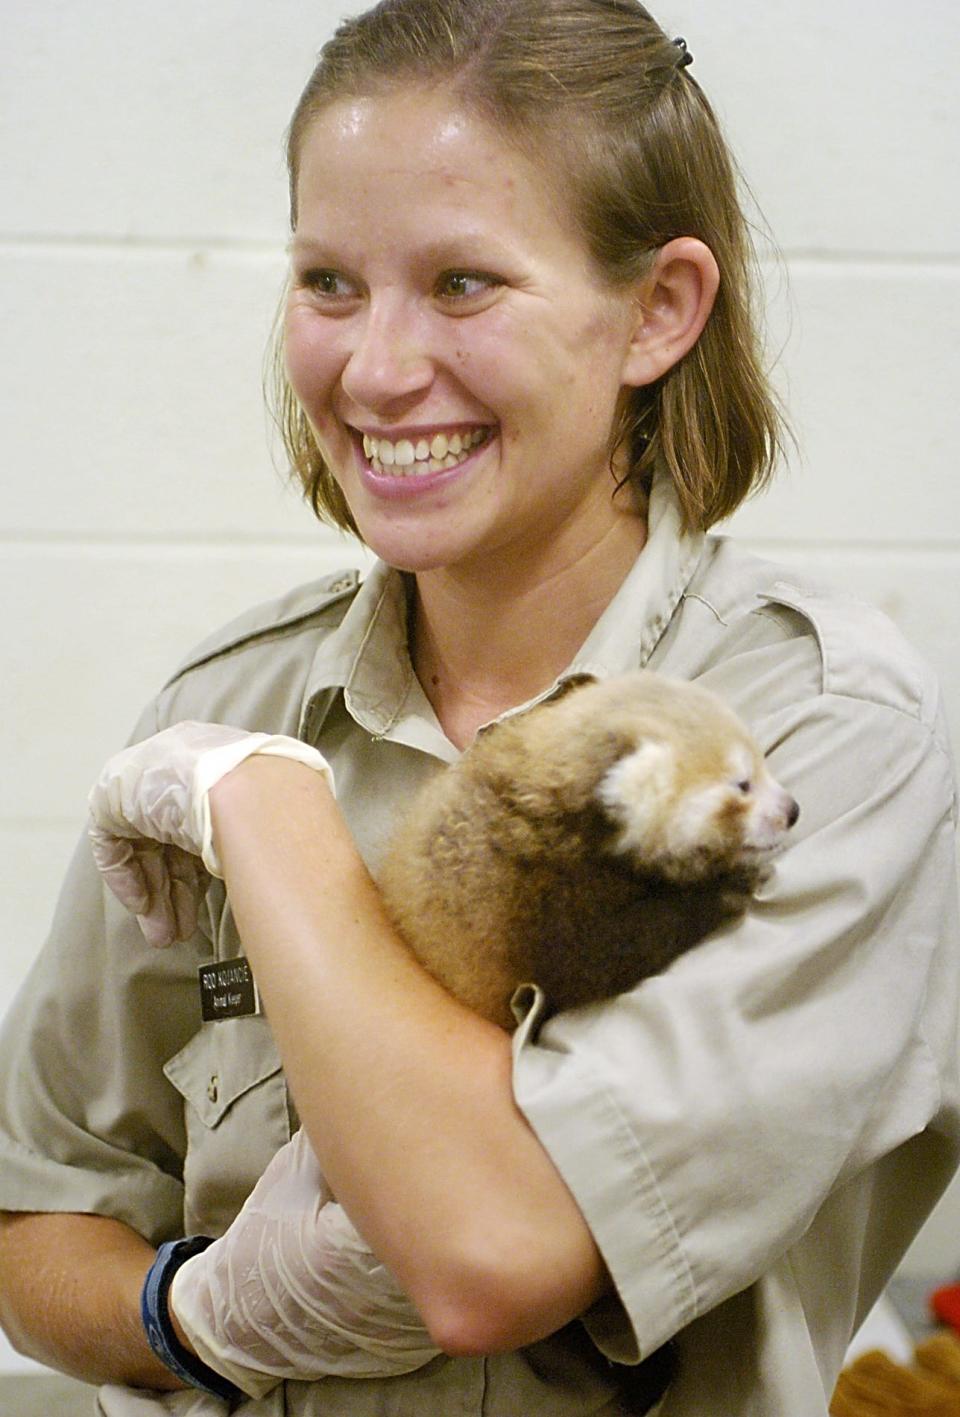 Melissa "Roo" Kojancie, then a zookeeper at the Erie Zoo, is shown in this 2005 file photo holding a baby red panda.